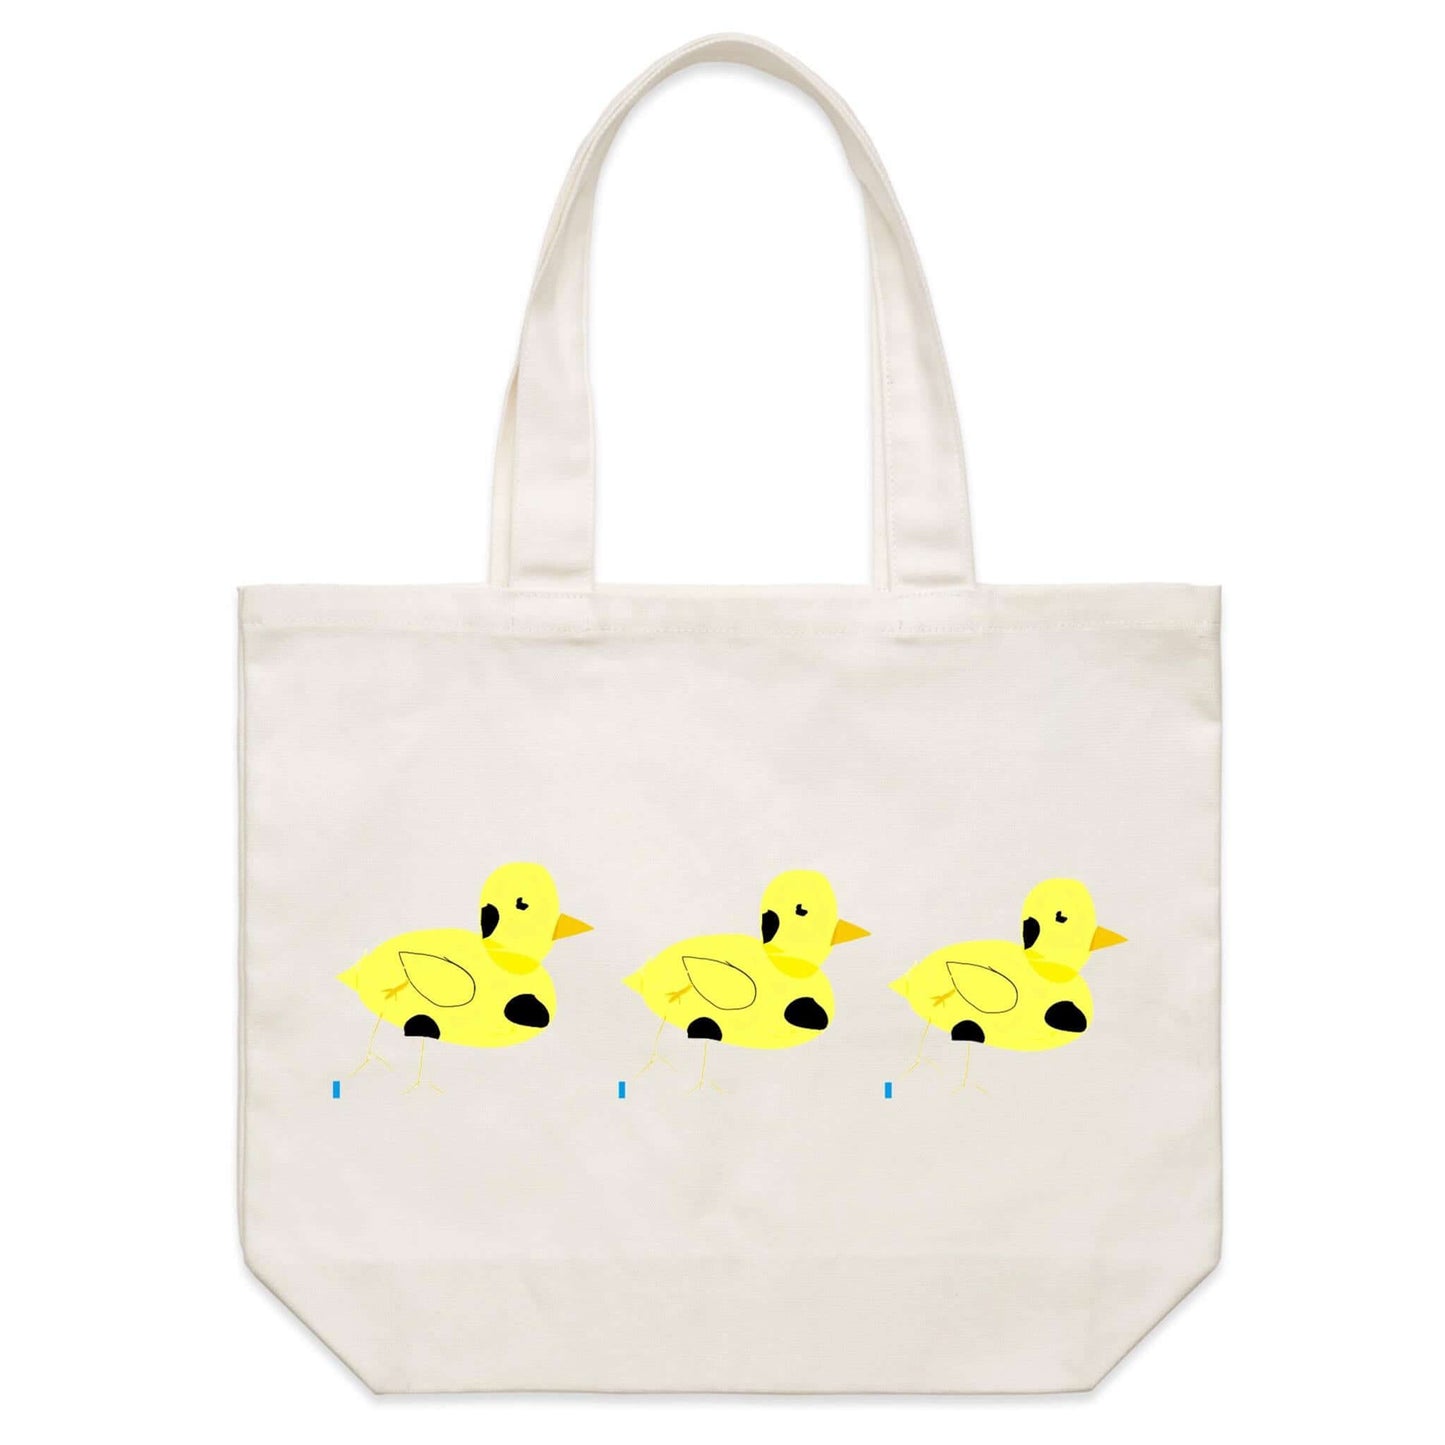 Duckie Bag featuring Myrtle the Four-Legged Chicken by D.B. Print (Myrtle renamed Duckie by D.B.'s little sister) Shoulder Canvas Tote Bag